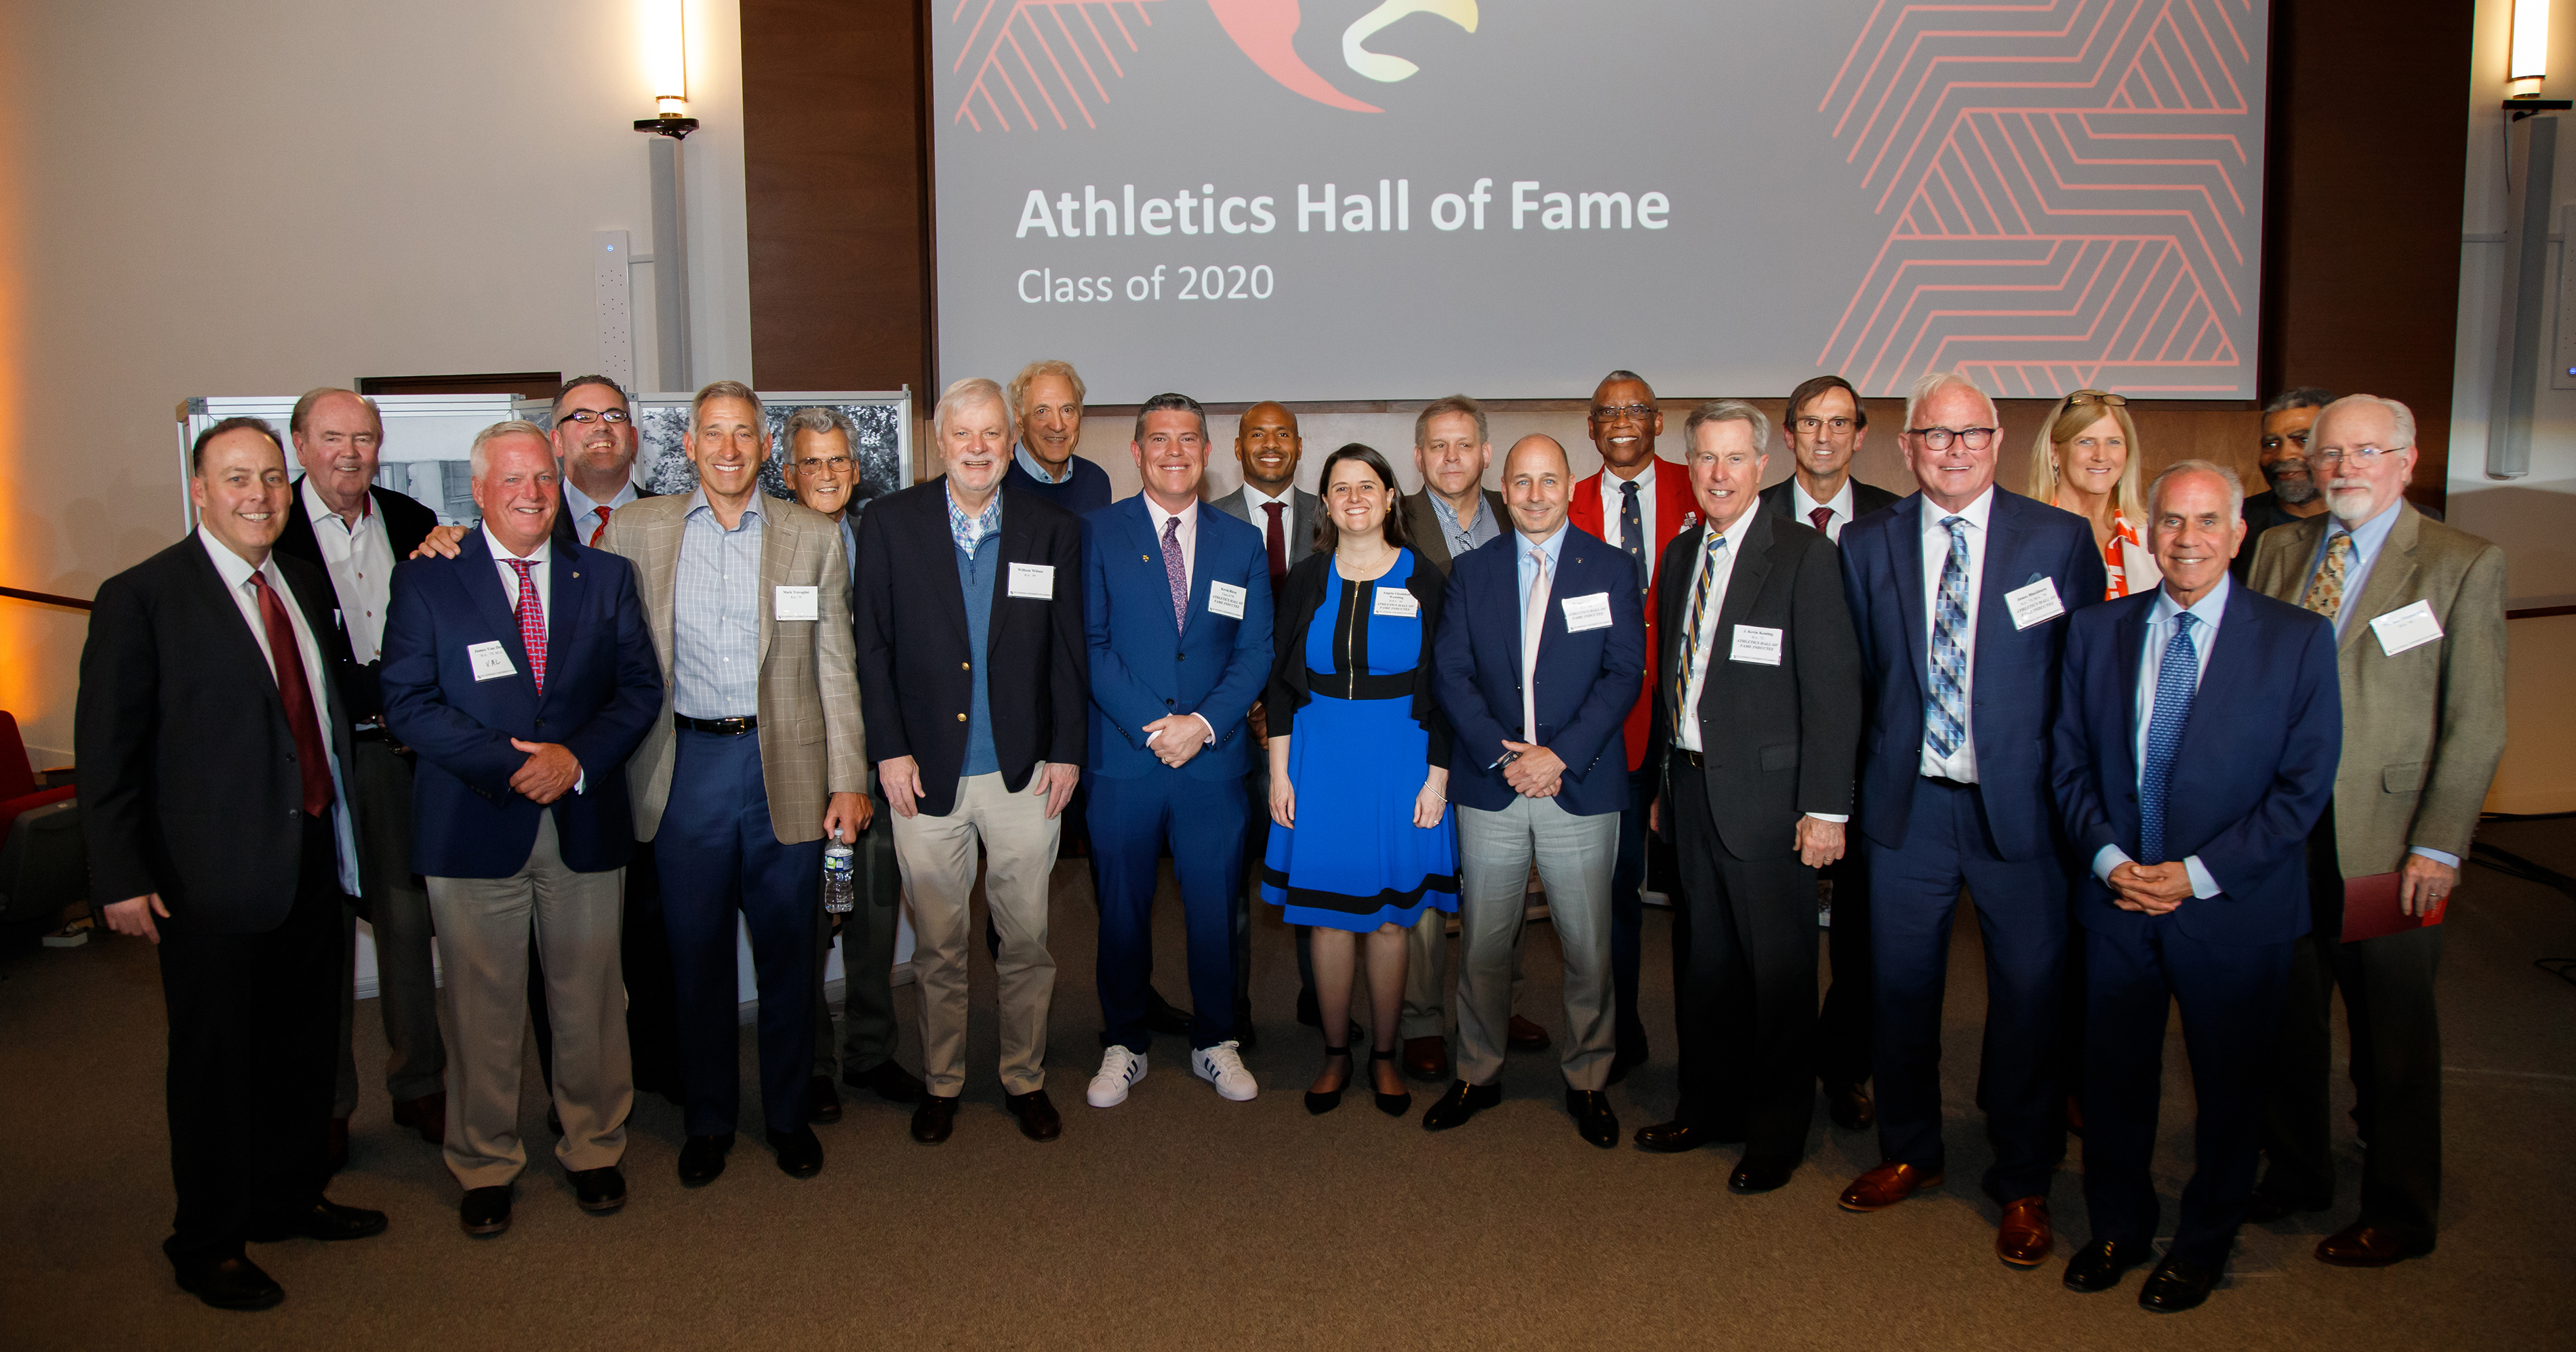 Athletics Hall of Fame members